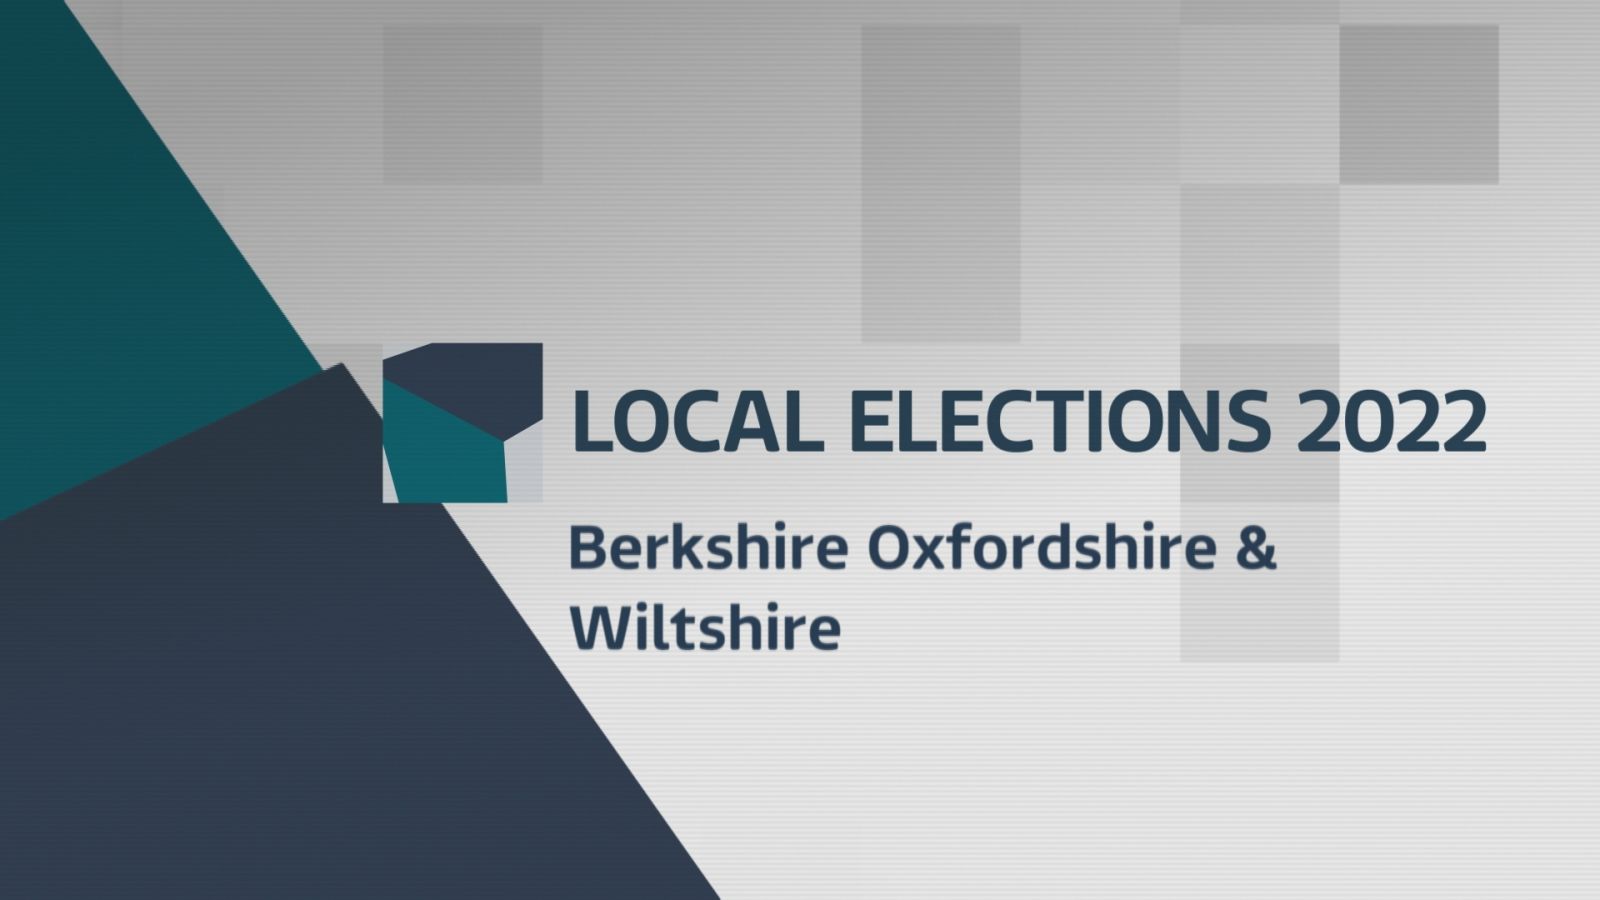 Local Elections 2022 Results in Berkshire, Oxfordshire & Wiltshire